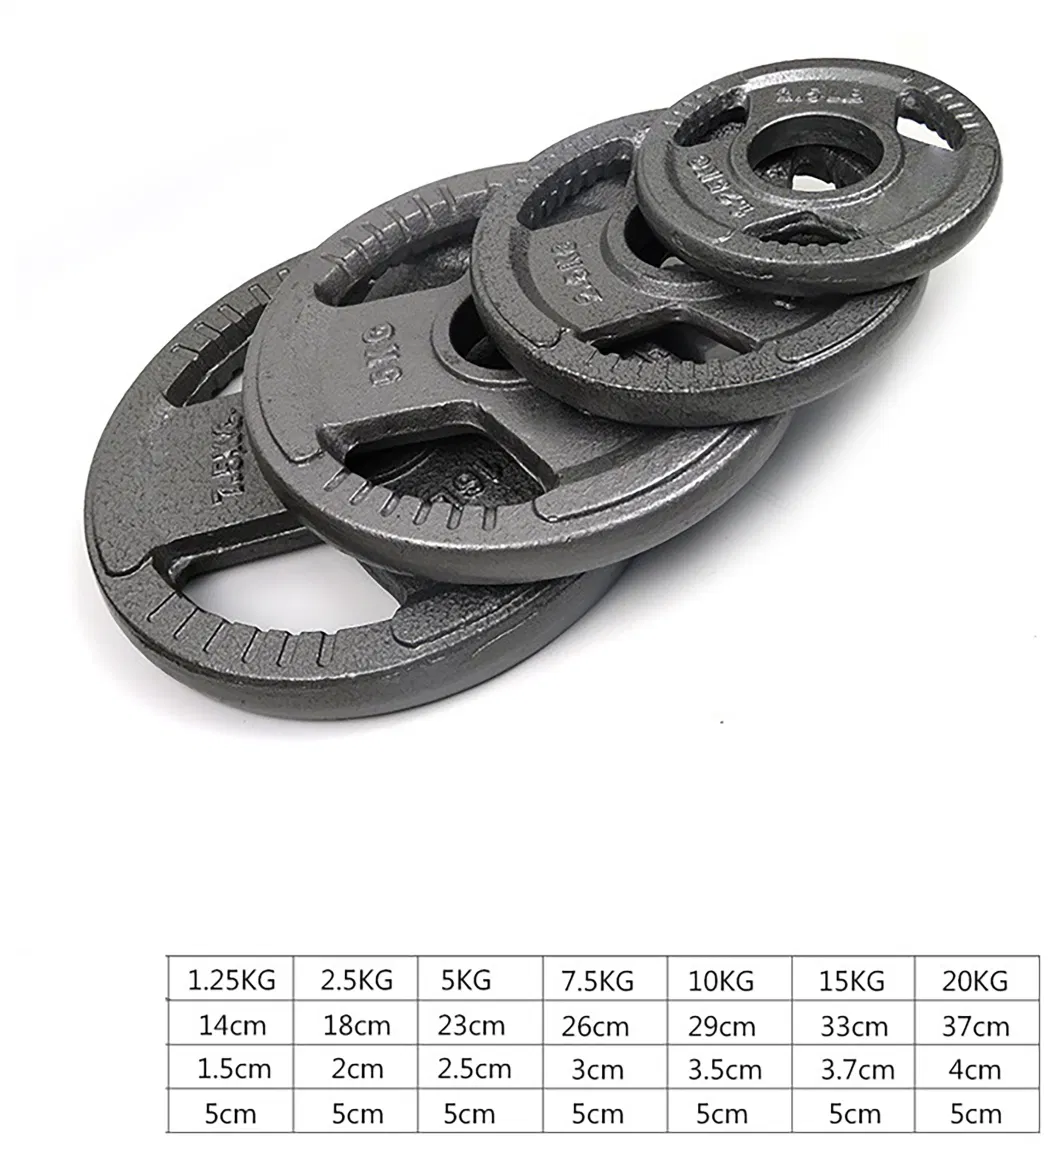 Standard Cast Iron Grip Weight Plates Fitness Equipment Barbell Plate for Strength Training